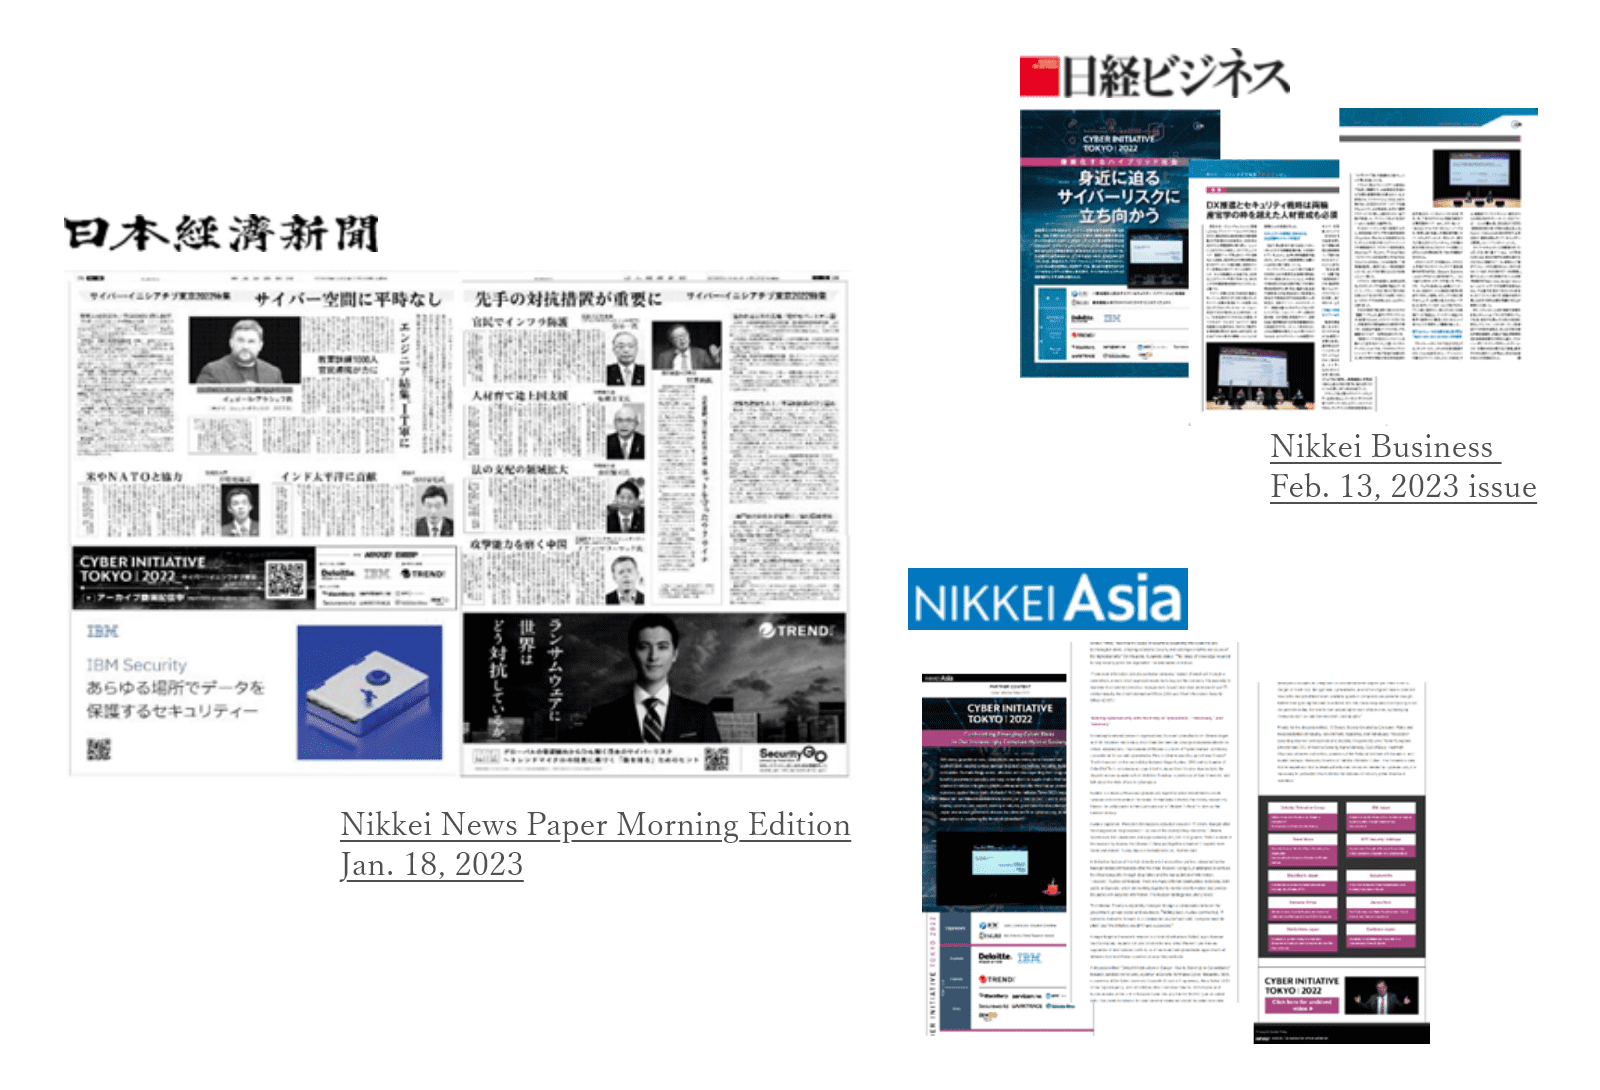 Media appearance:The Nikkei,The Nikkei Business Daily and Nikkei Asia